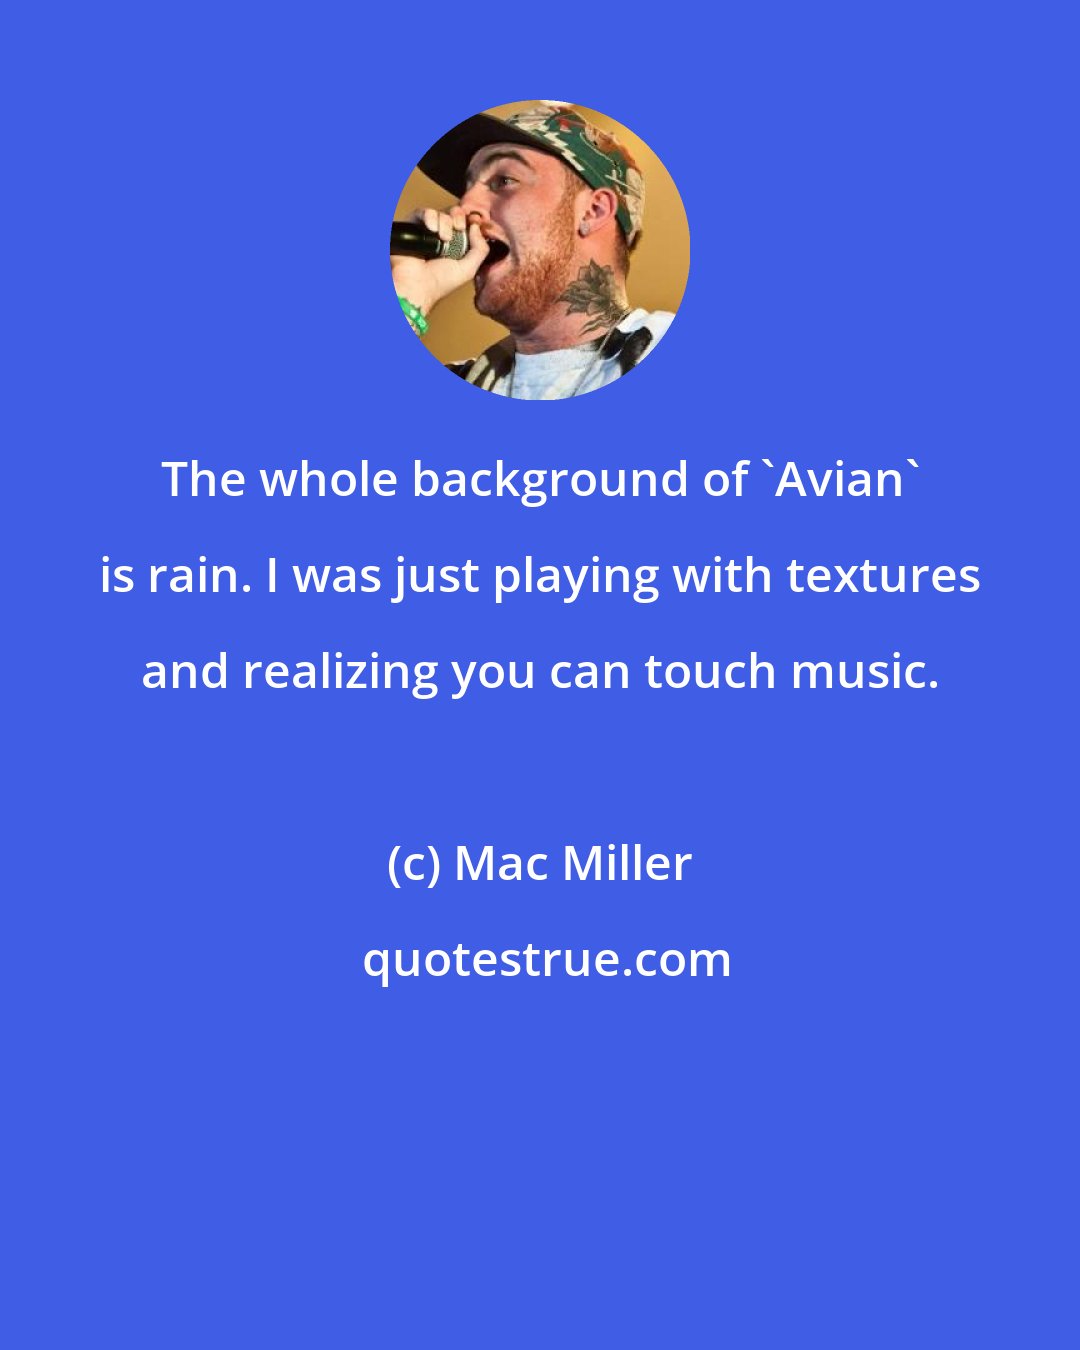 Mac Miller: The whole background of 'Avian' is rain. I was just playing with textures and realizing you can touch music.